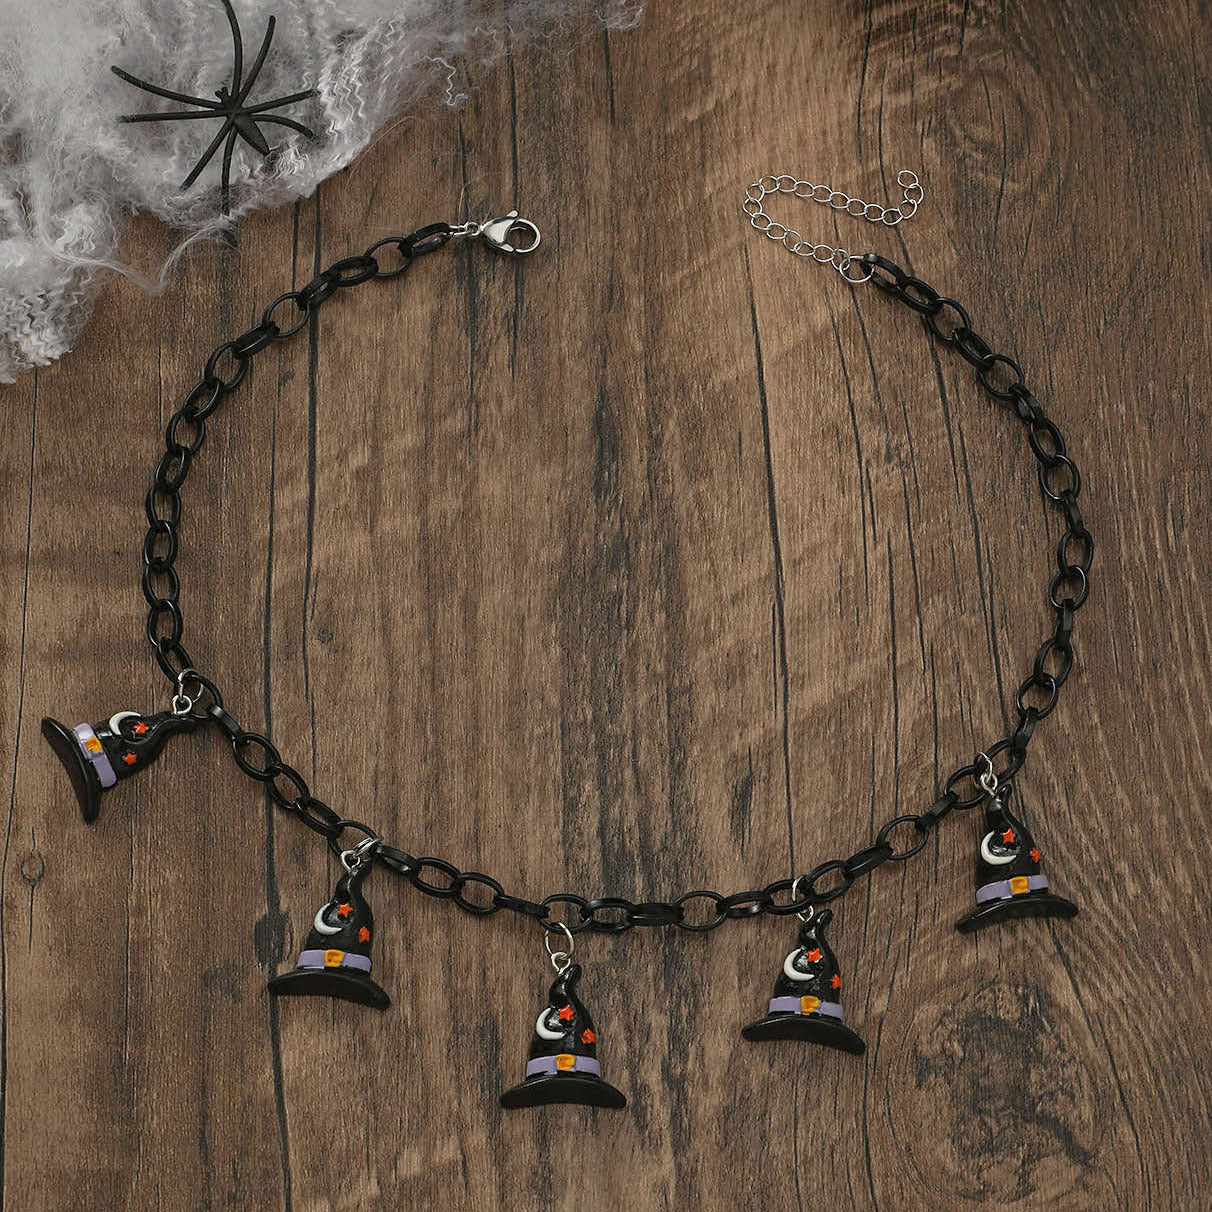 Halloween Necklace Clavicle Chain Female